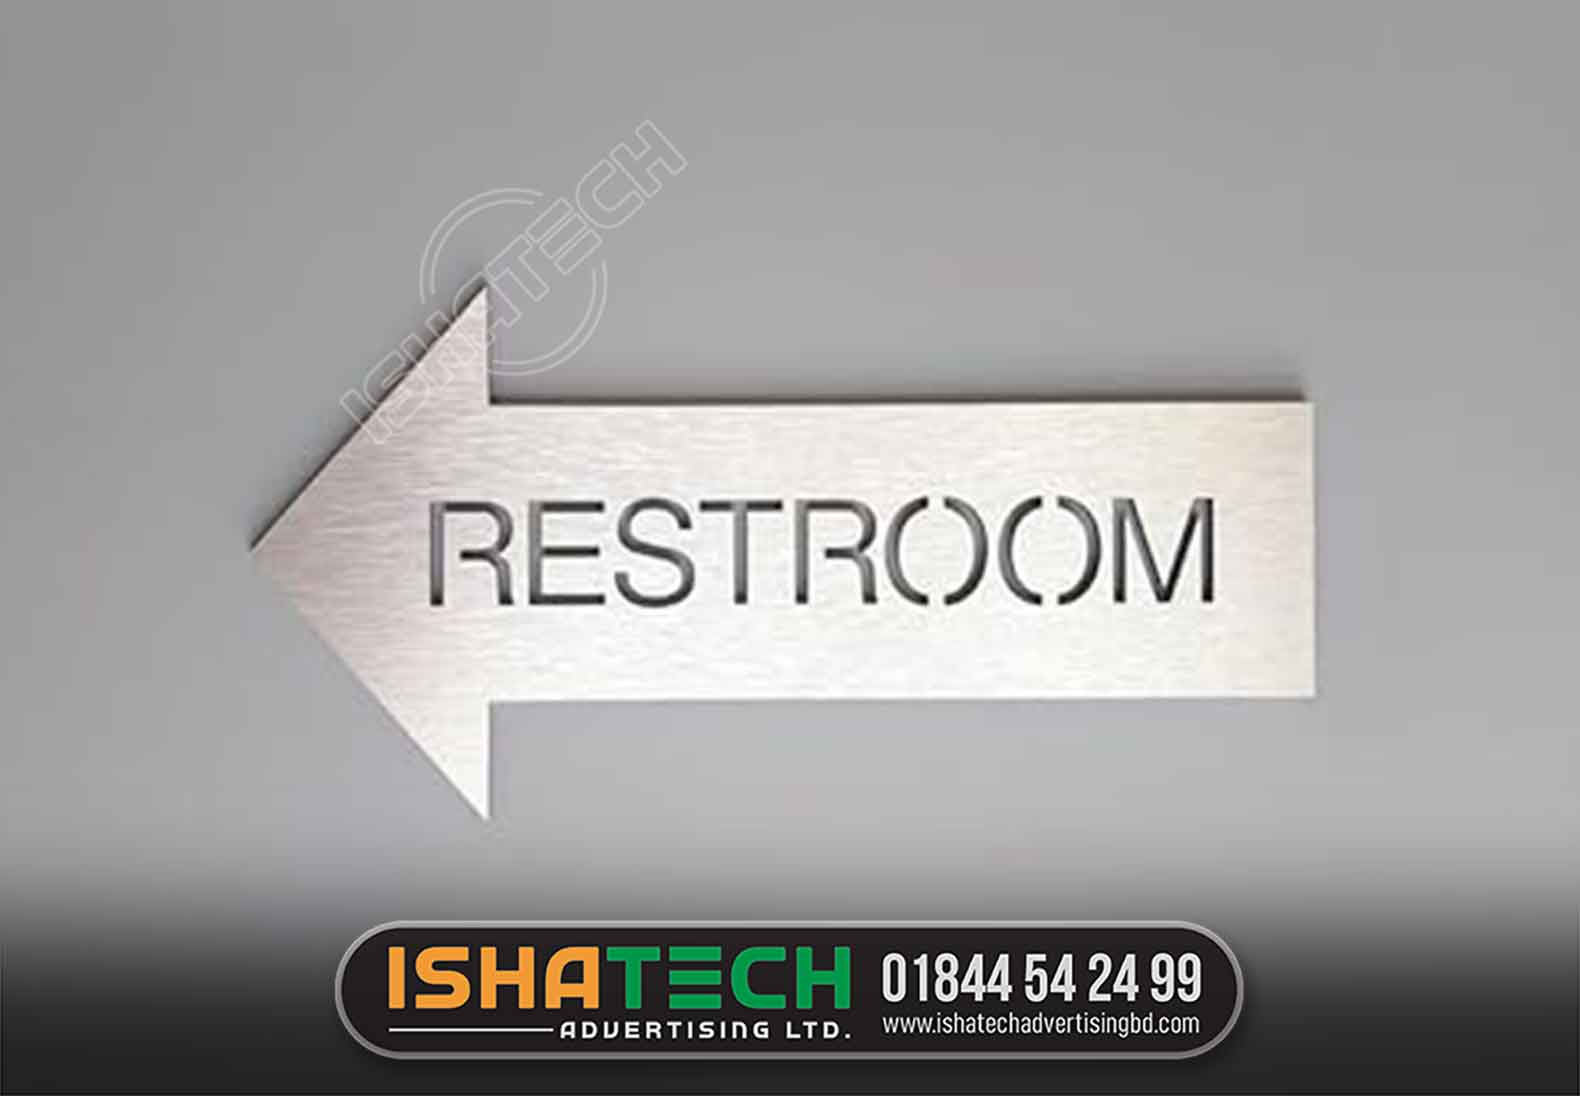 STAINLESS STEEL RESTROOM NAME PALTE BY ISHATECH ADVERTISING LTD